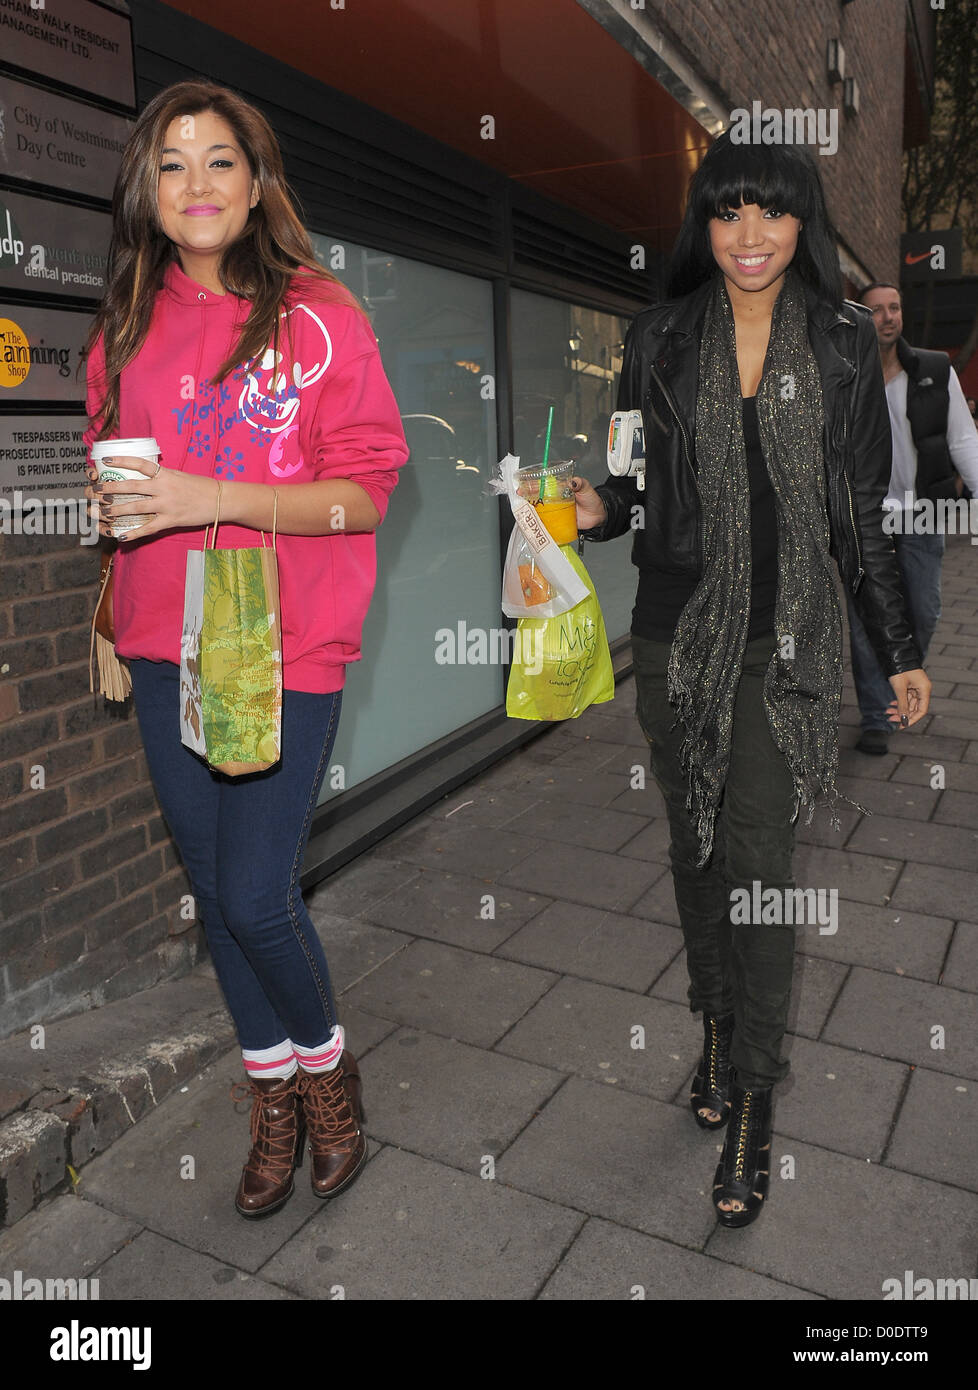 X Factor finalists Geneva Lane and Esther Campbell from girl group ...